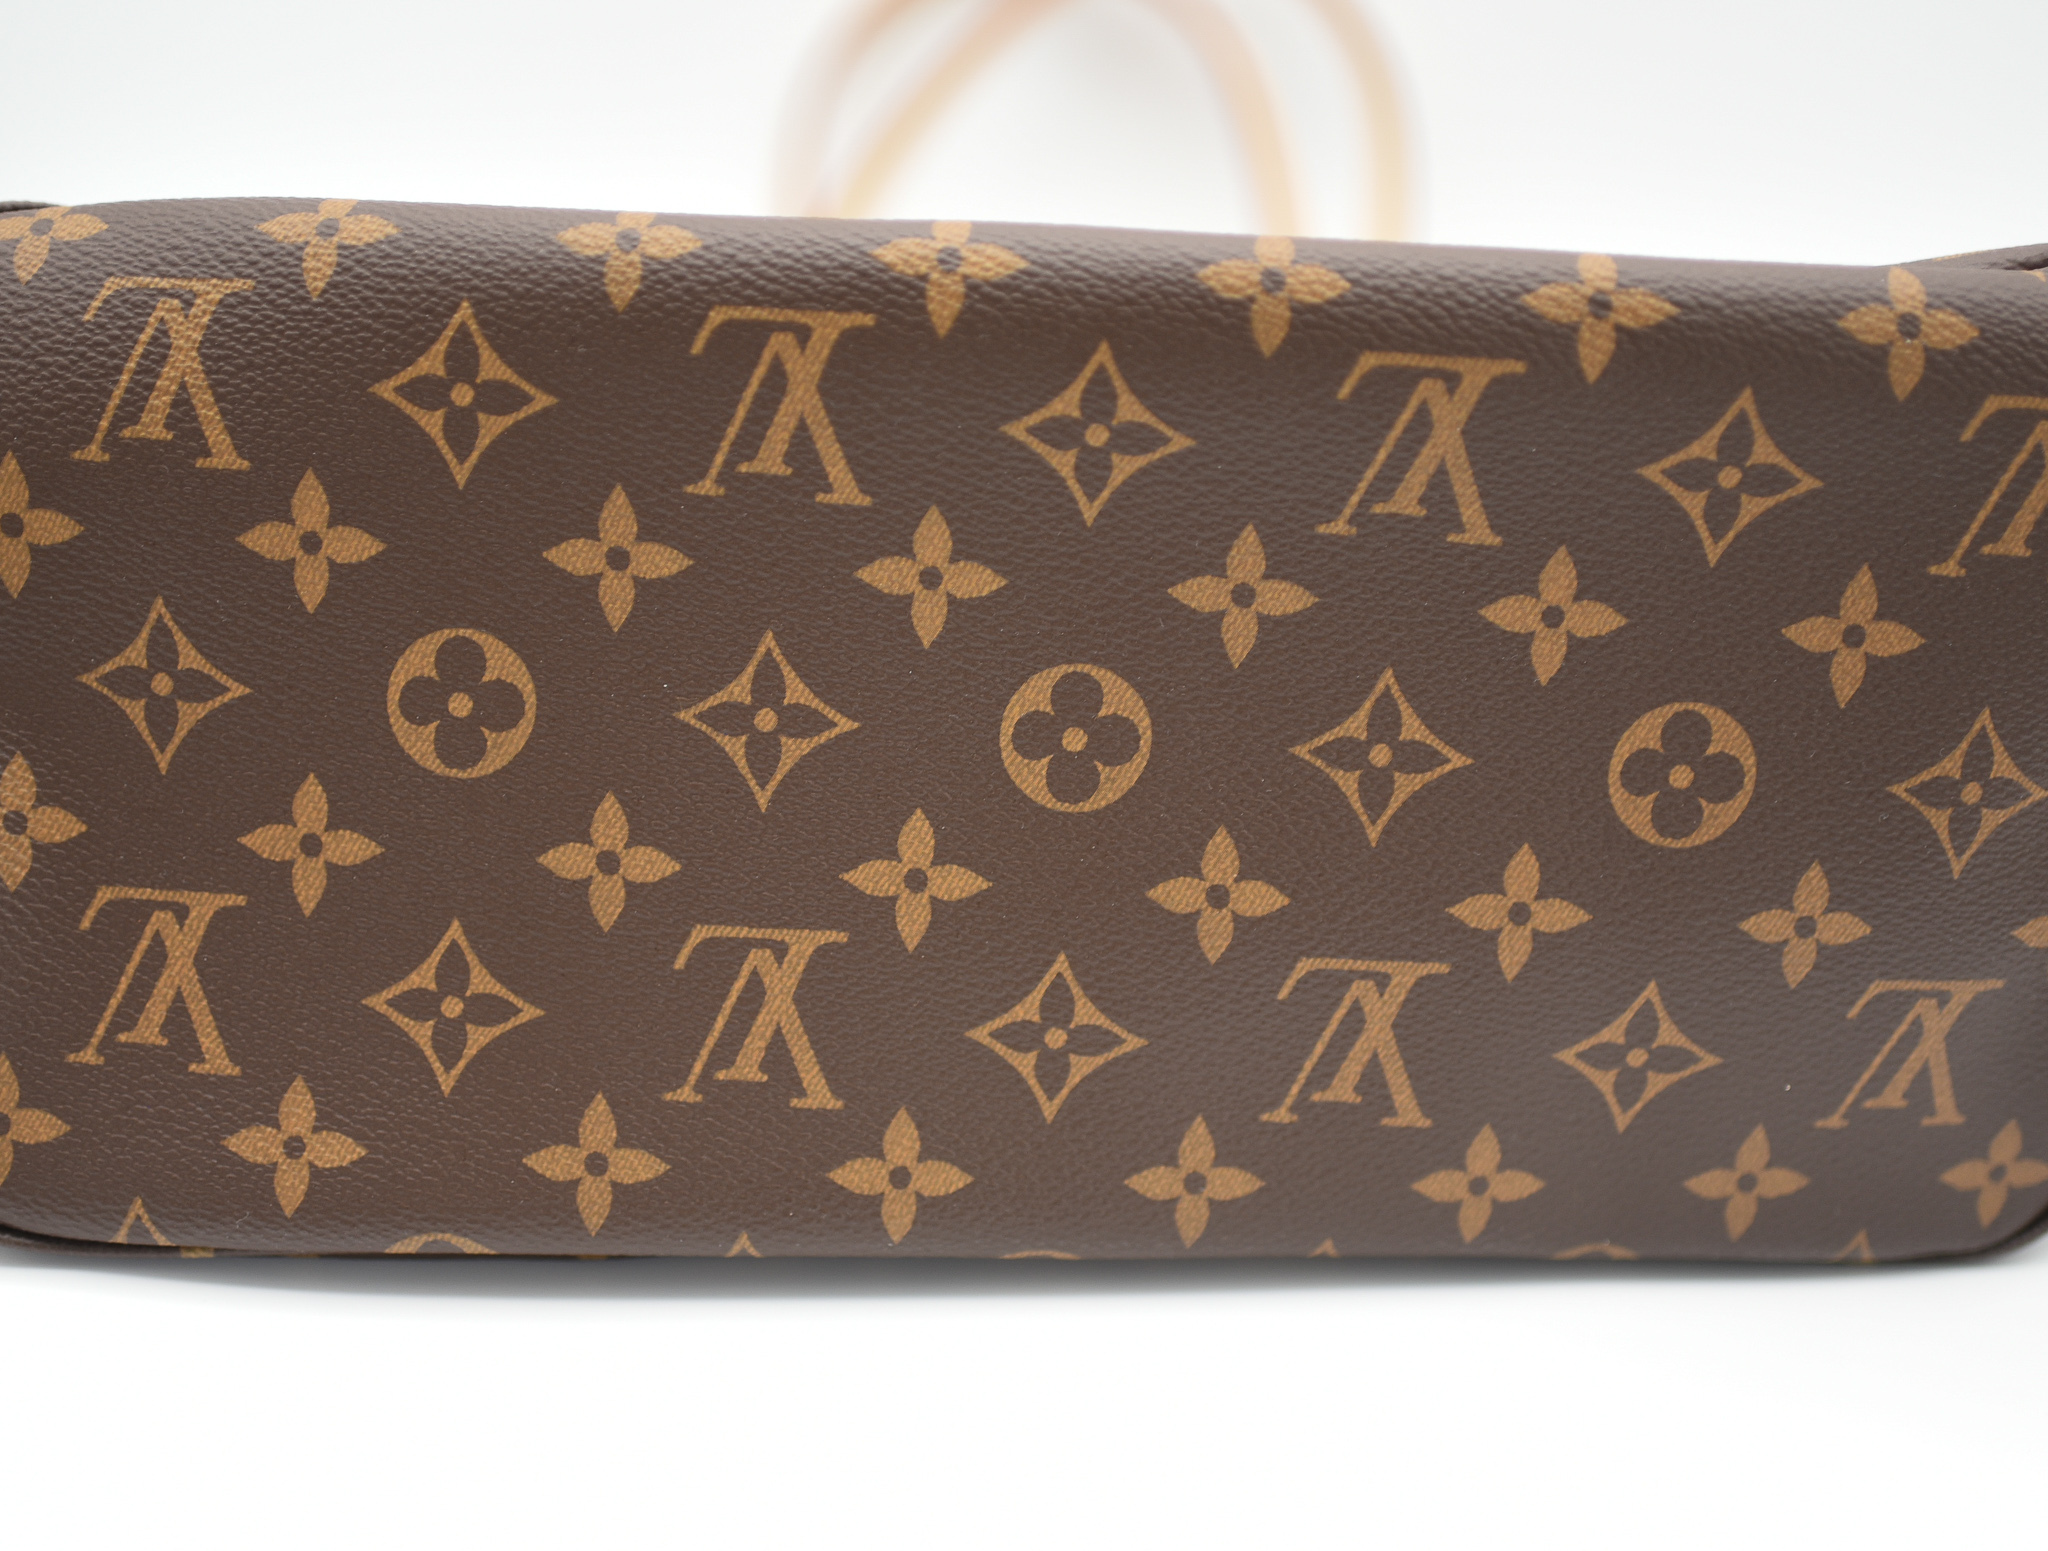 LOUIS VUITTON NEVERFULL MM Monogram Tote Bag with pouch No.1349e